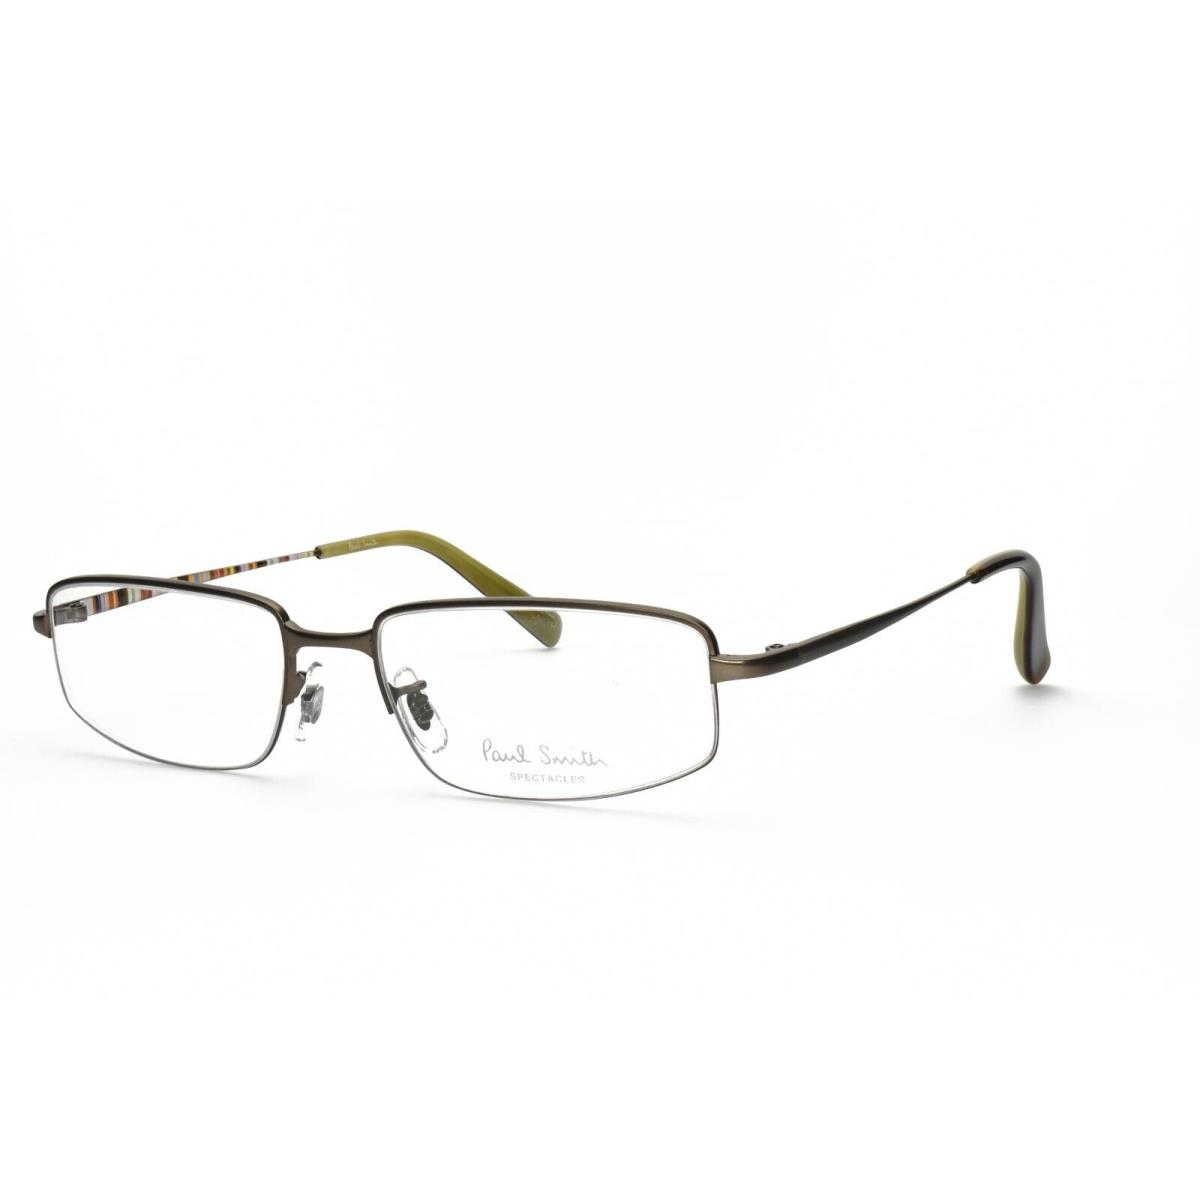 Paul Smith PS 1005 W Eyeglasses Frames Only 51-17-140